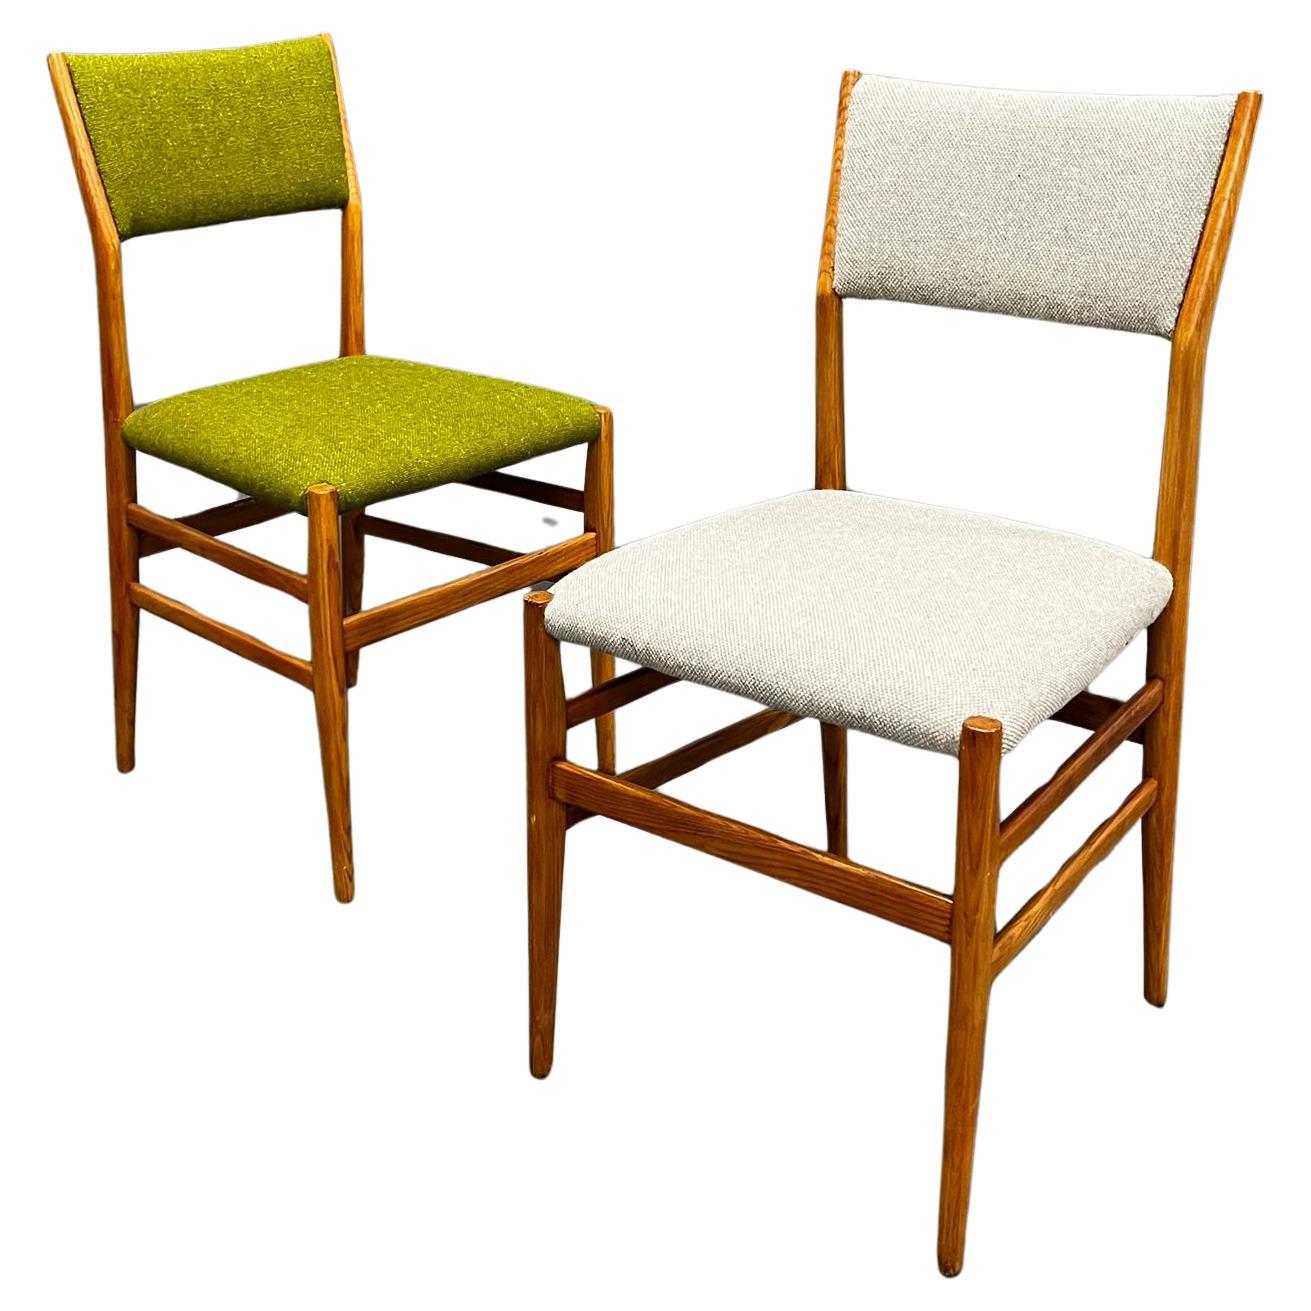 Gio Ponti for Cassina, Leggera Chair, Model 646, 1950s  

Ash frame, recently re-upholstered in Kvadrat 'Tonus' fabric, one available in green, one in pale grey.  

Good condition.  Grey chair has a small split and loss of wood to the top left